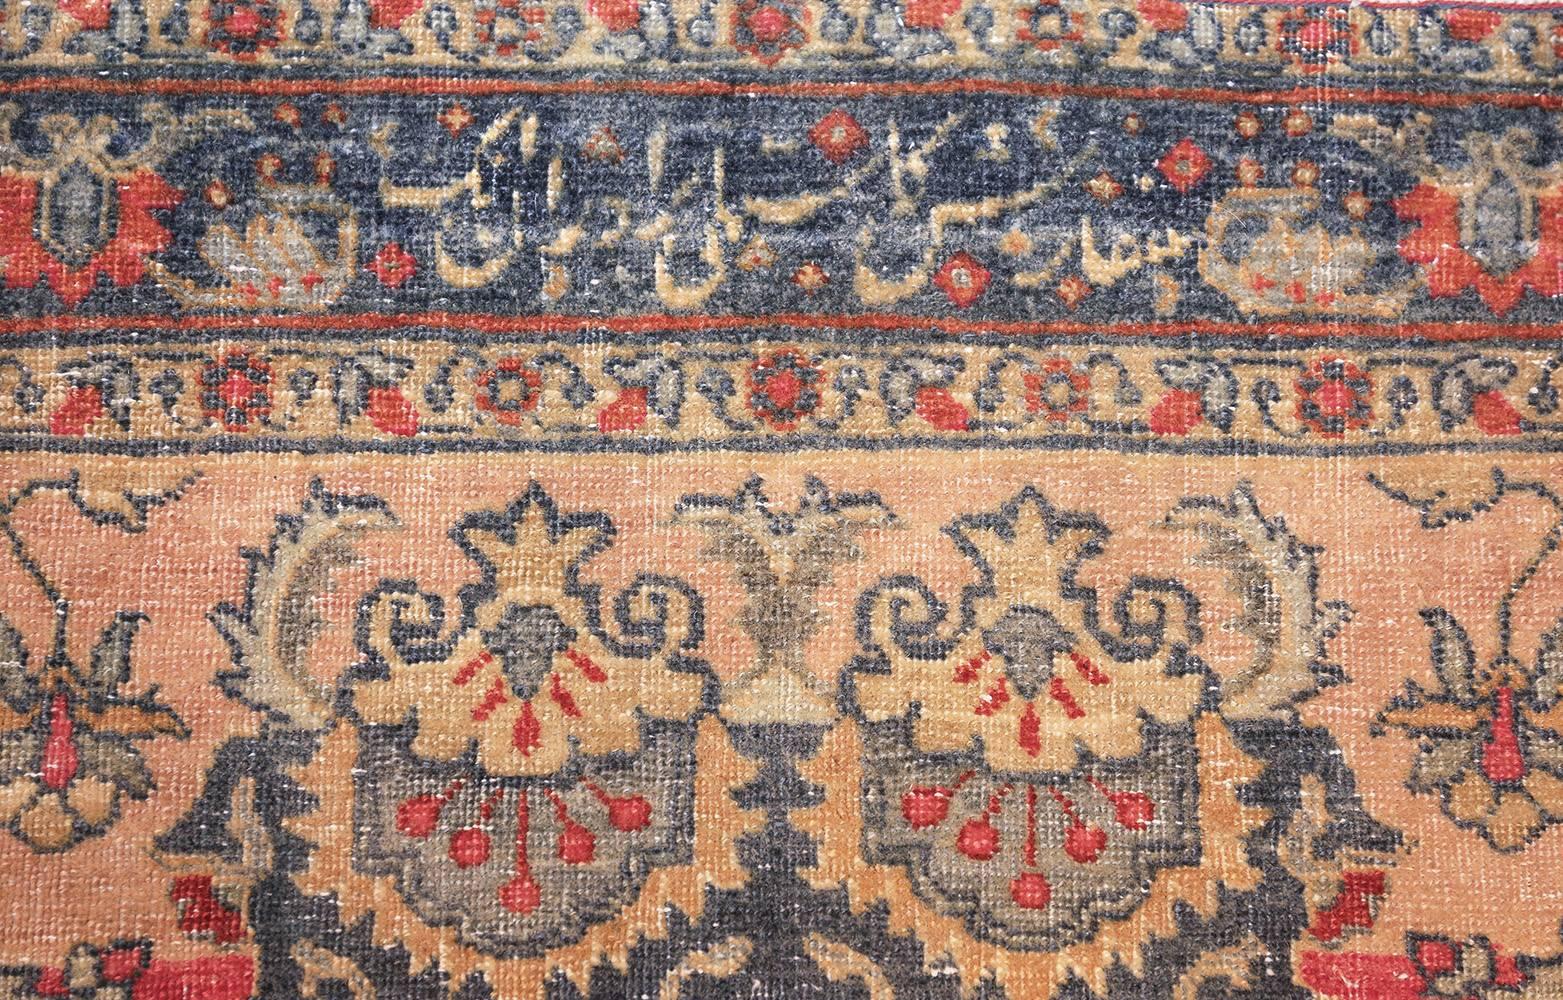 Wool Beautiful and Extremely Decorative Light Blue Antique Persian Tabriz Rug